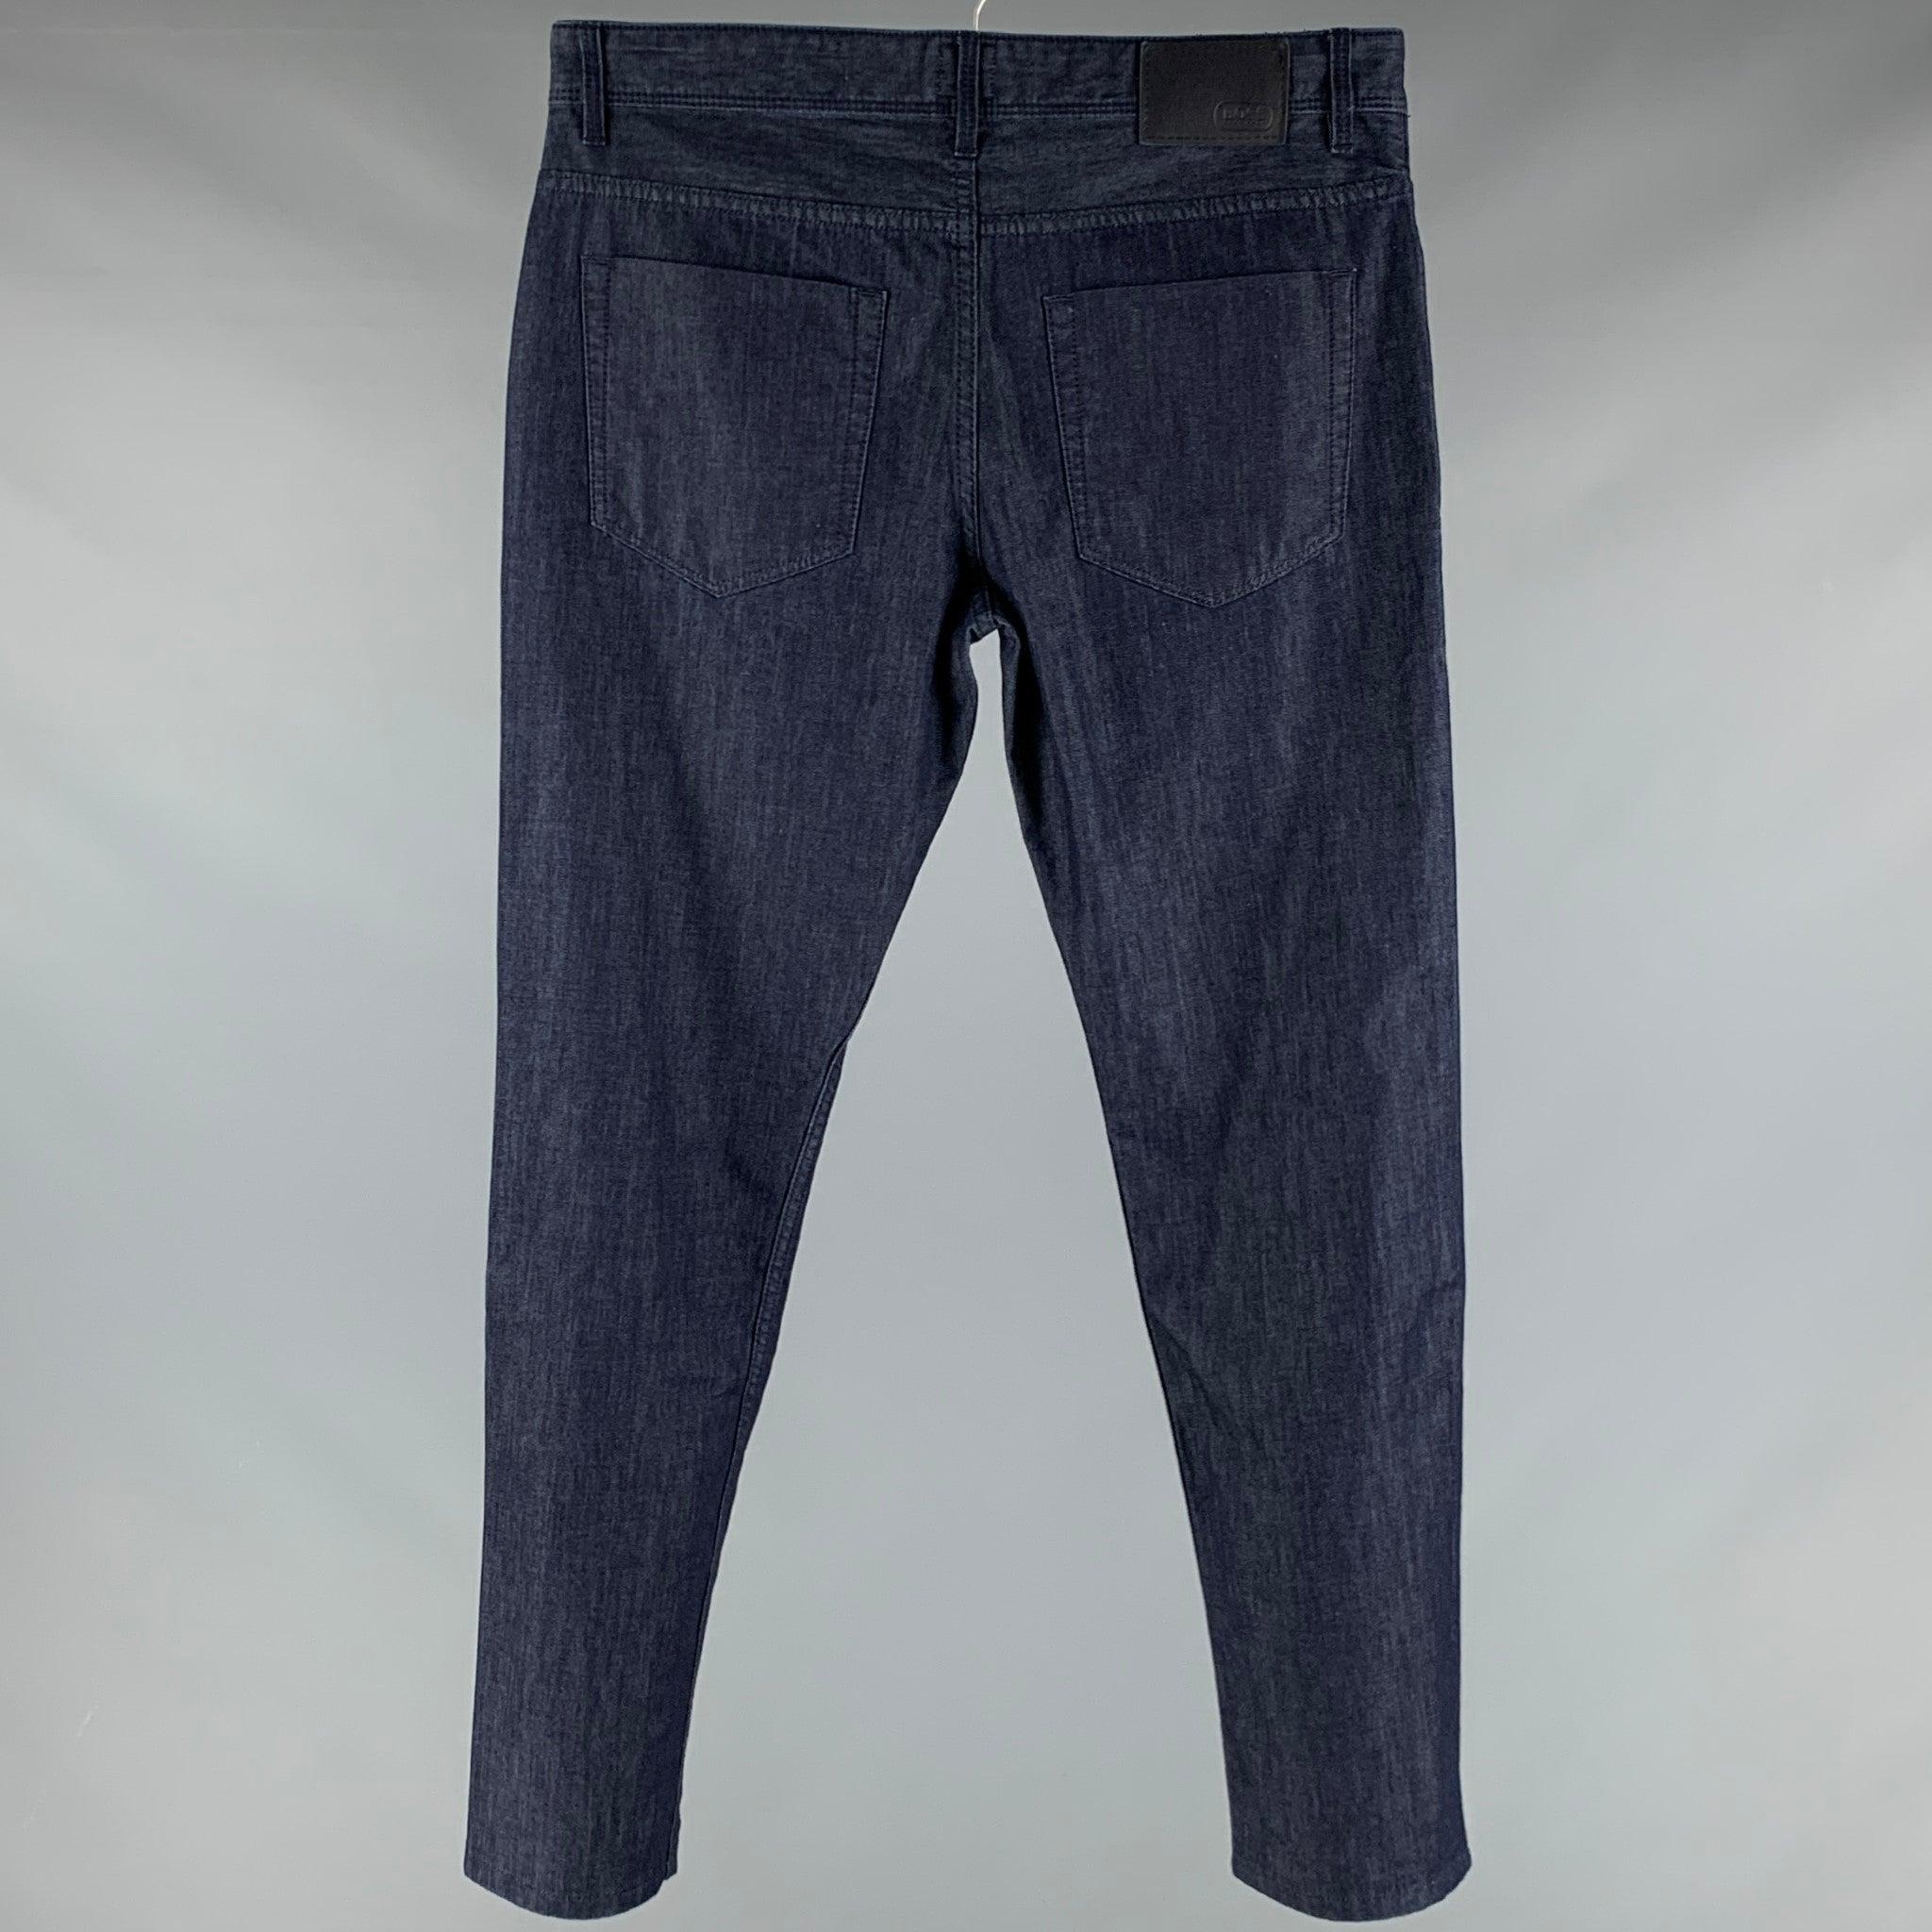 BOSS by HUGO BOSS jeans
in a blue cotton blend fabric featuring five pockets style, and zip fly closure.Excellent Pre-Owned Condition. 

Marked:   33/32 

Measurements: 
  Waist: 32 inches Rise: 8.5 inches Inseam: 32 inches 
  
  
 
Reference: